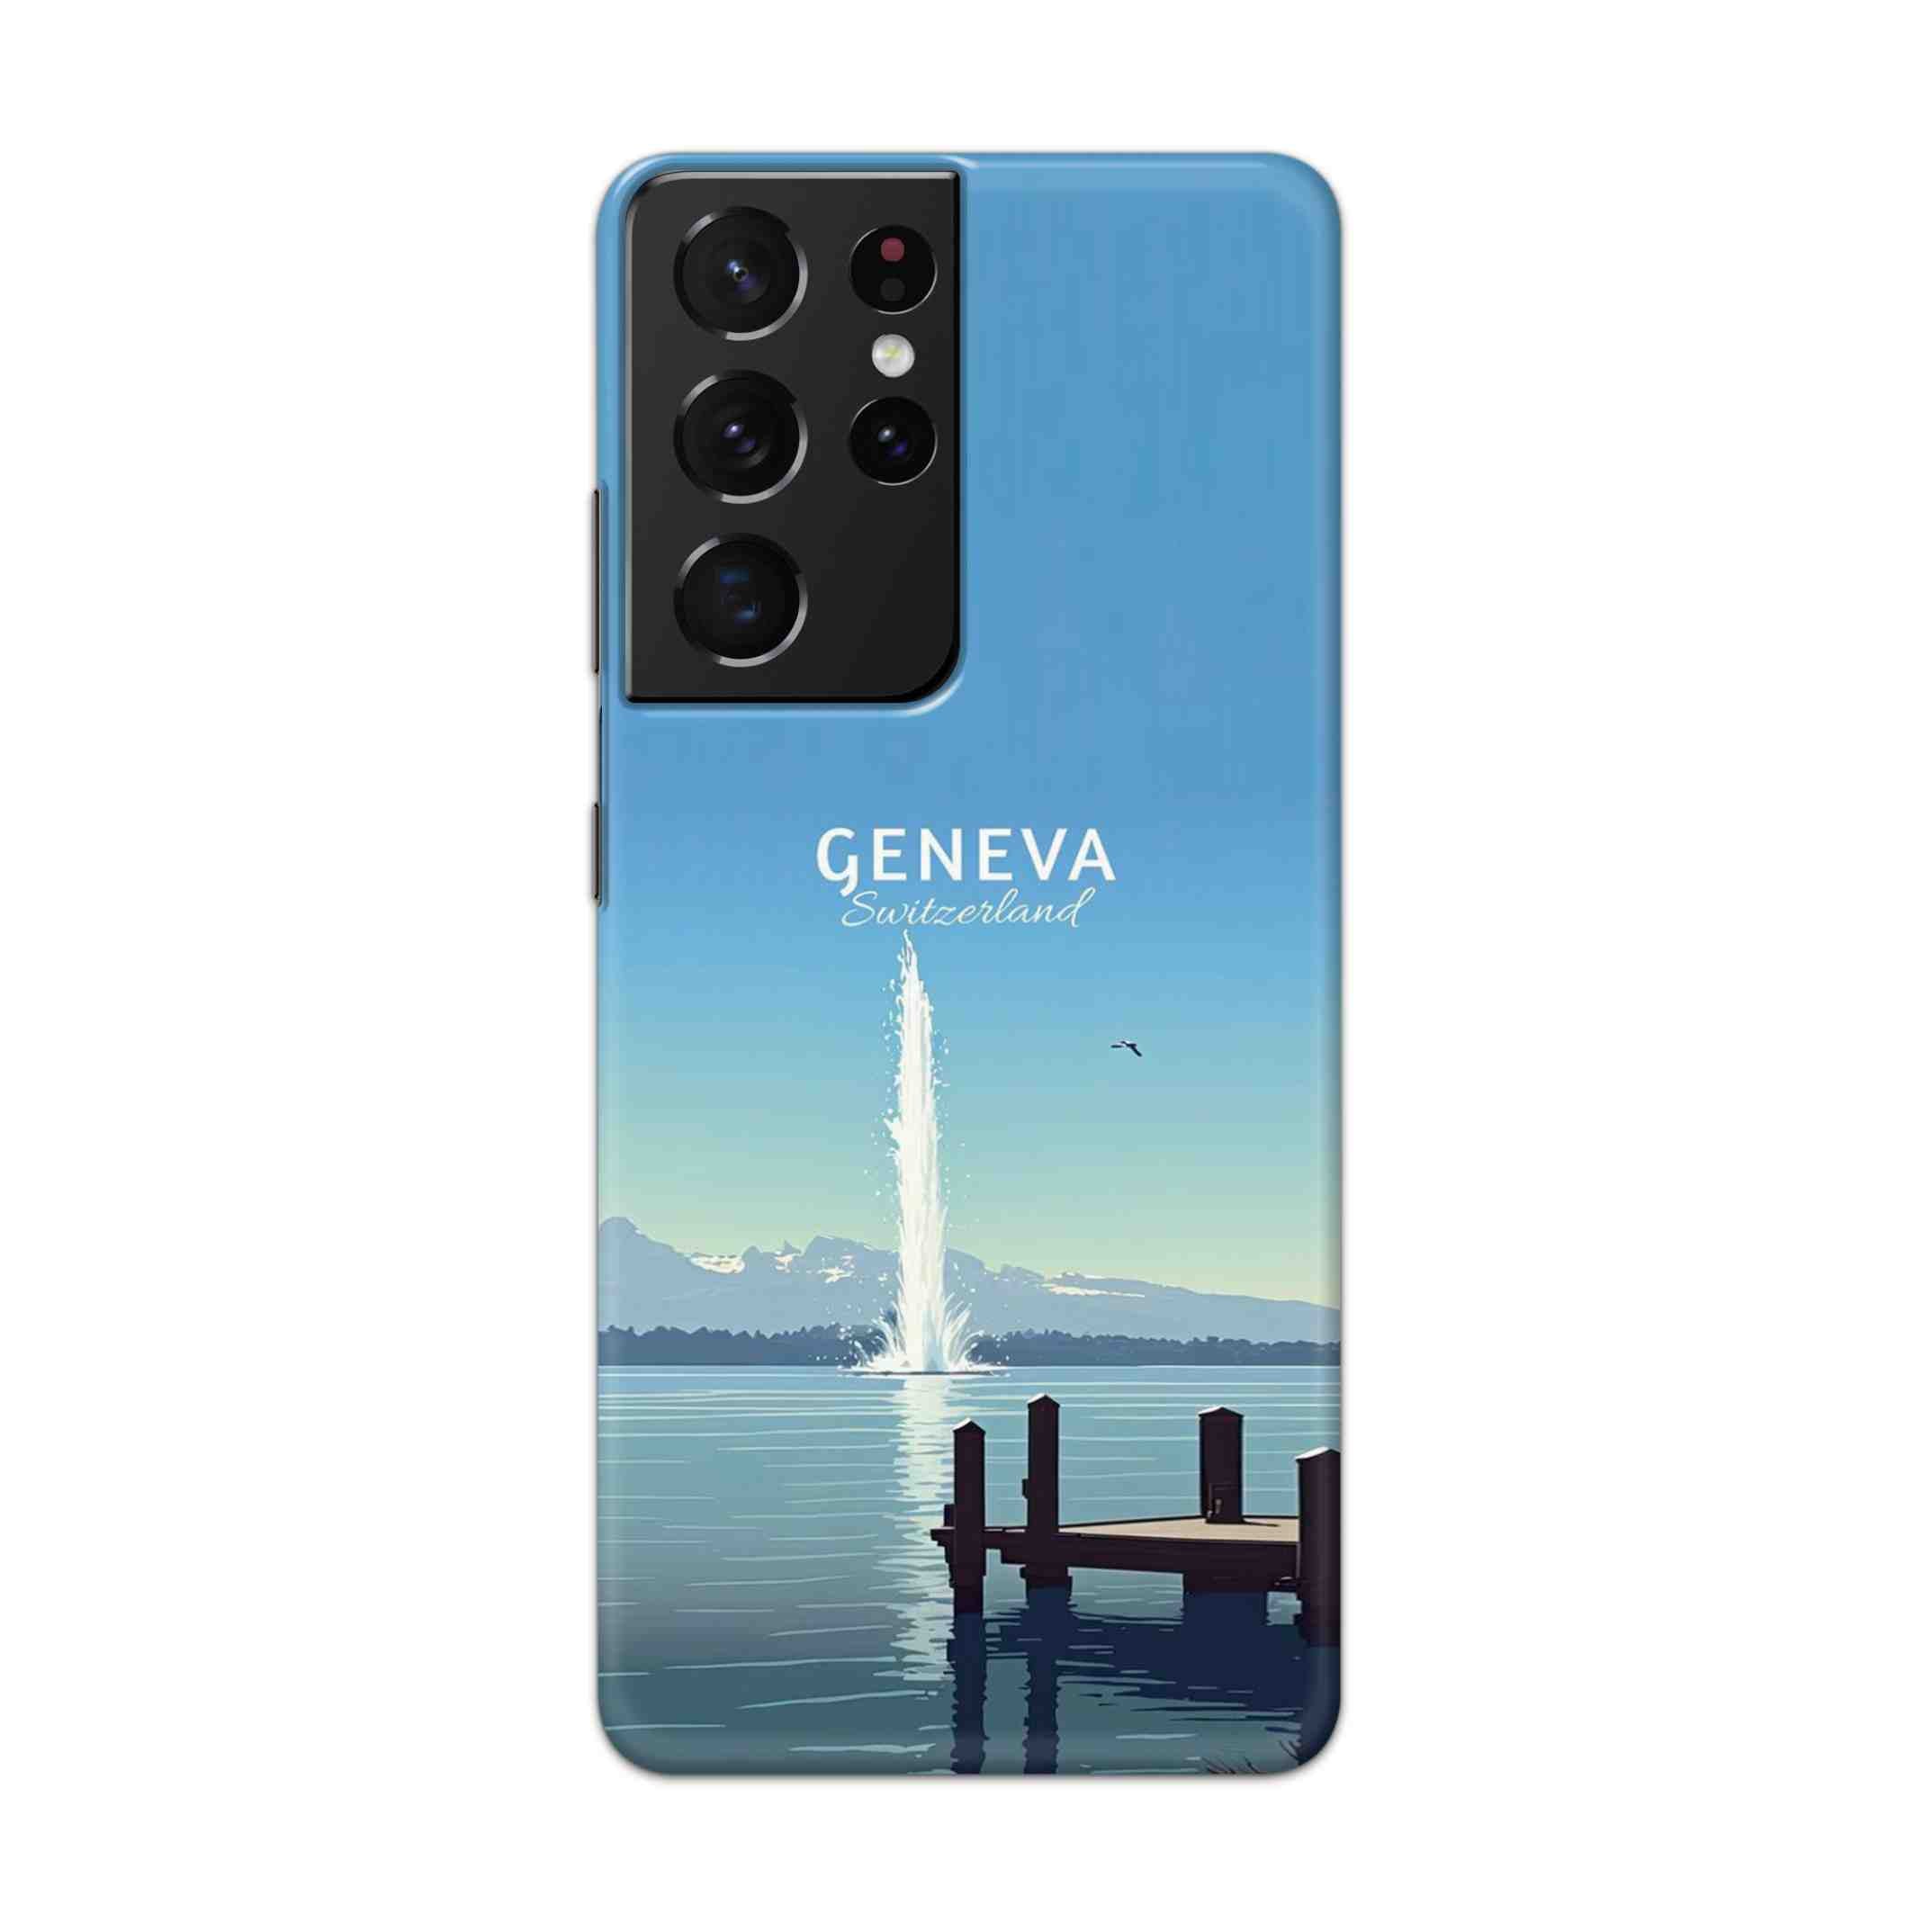 Buy Geneva Hard Back Mobile Phone Case Cover For Samsung Galaxy S21 Ultra Online